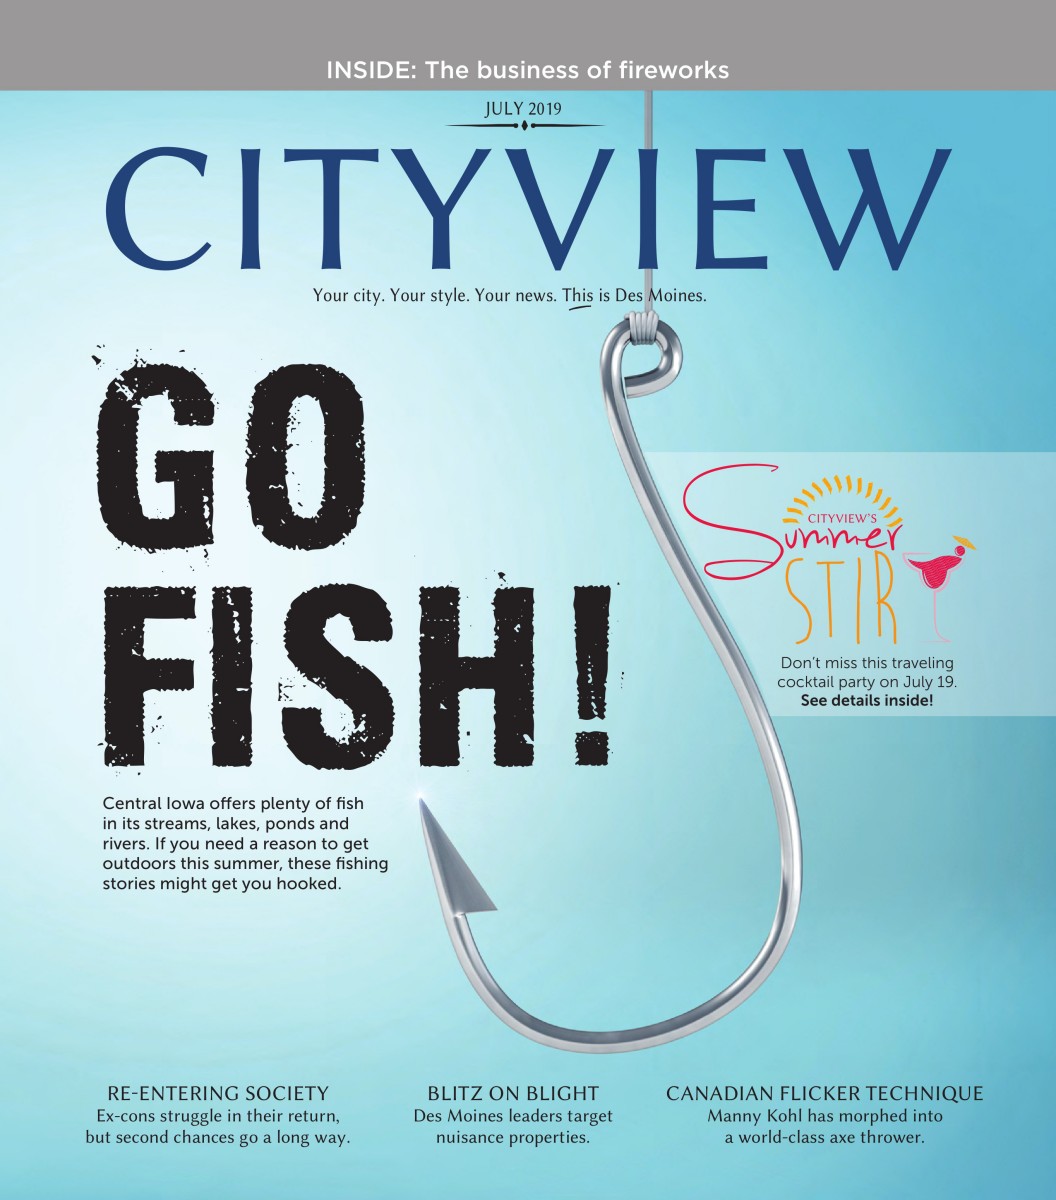 http://www.dmcityview.com/CityviewJuly2019/files/pages/tablet/1.jpg